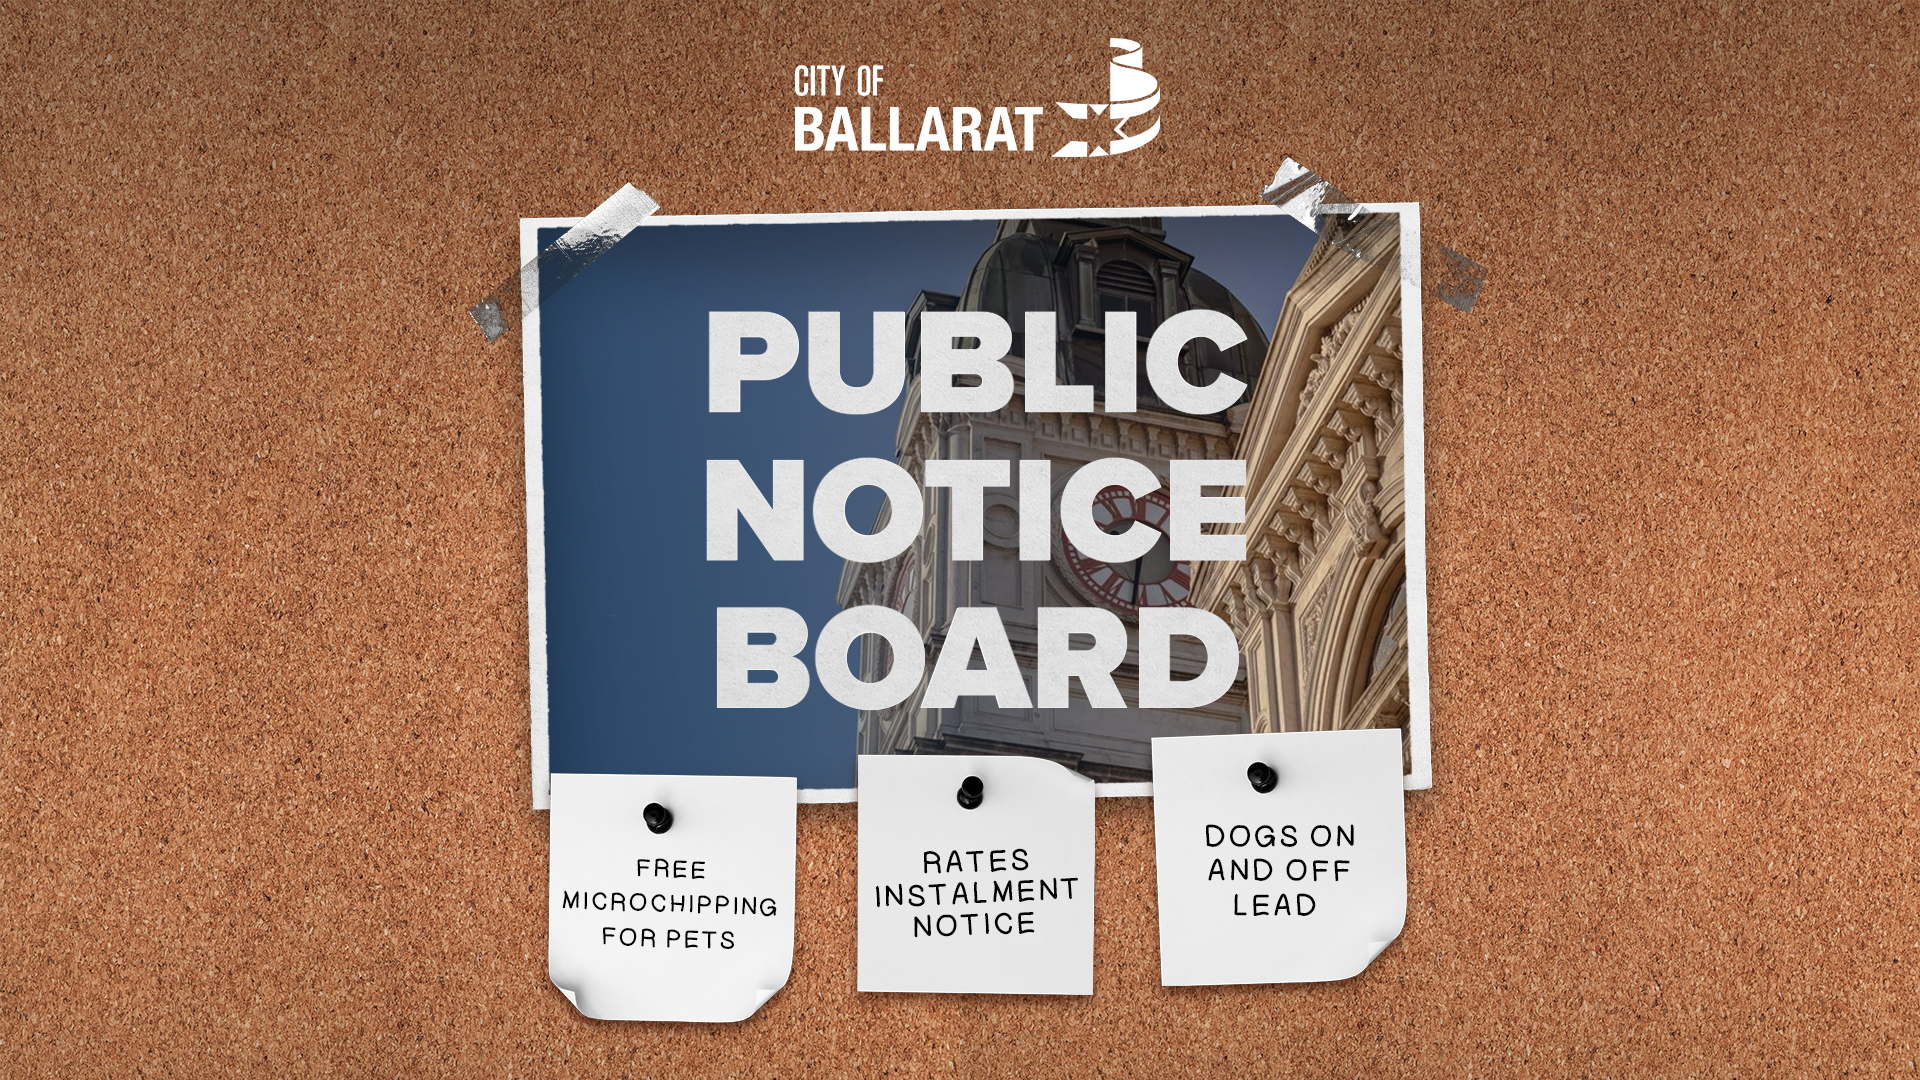 Notice board with Public Notice Board text over an image of Ballarat Town Hall. Three notes underneath with text saying FREE MICROCHIPPING FOR PETS, RATES INSTALMENT NOTICE, DOGS ON AND OFF LEAD